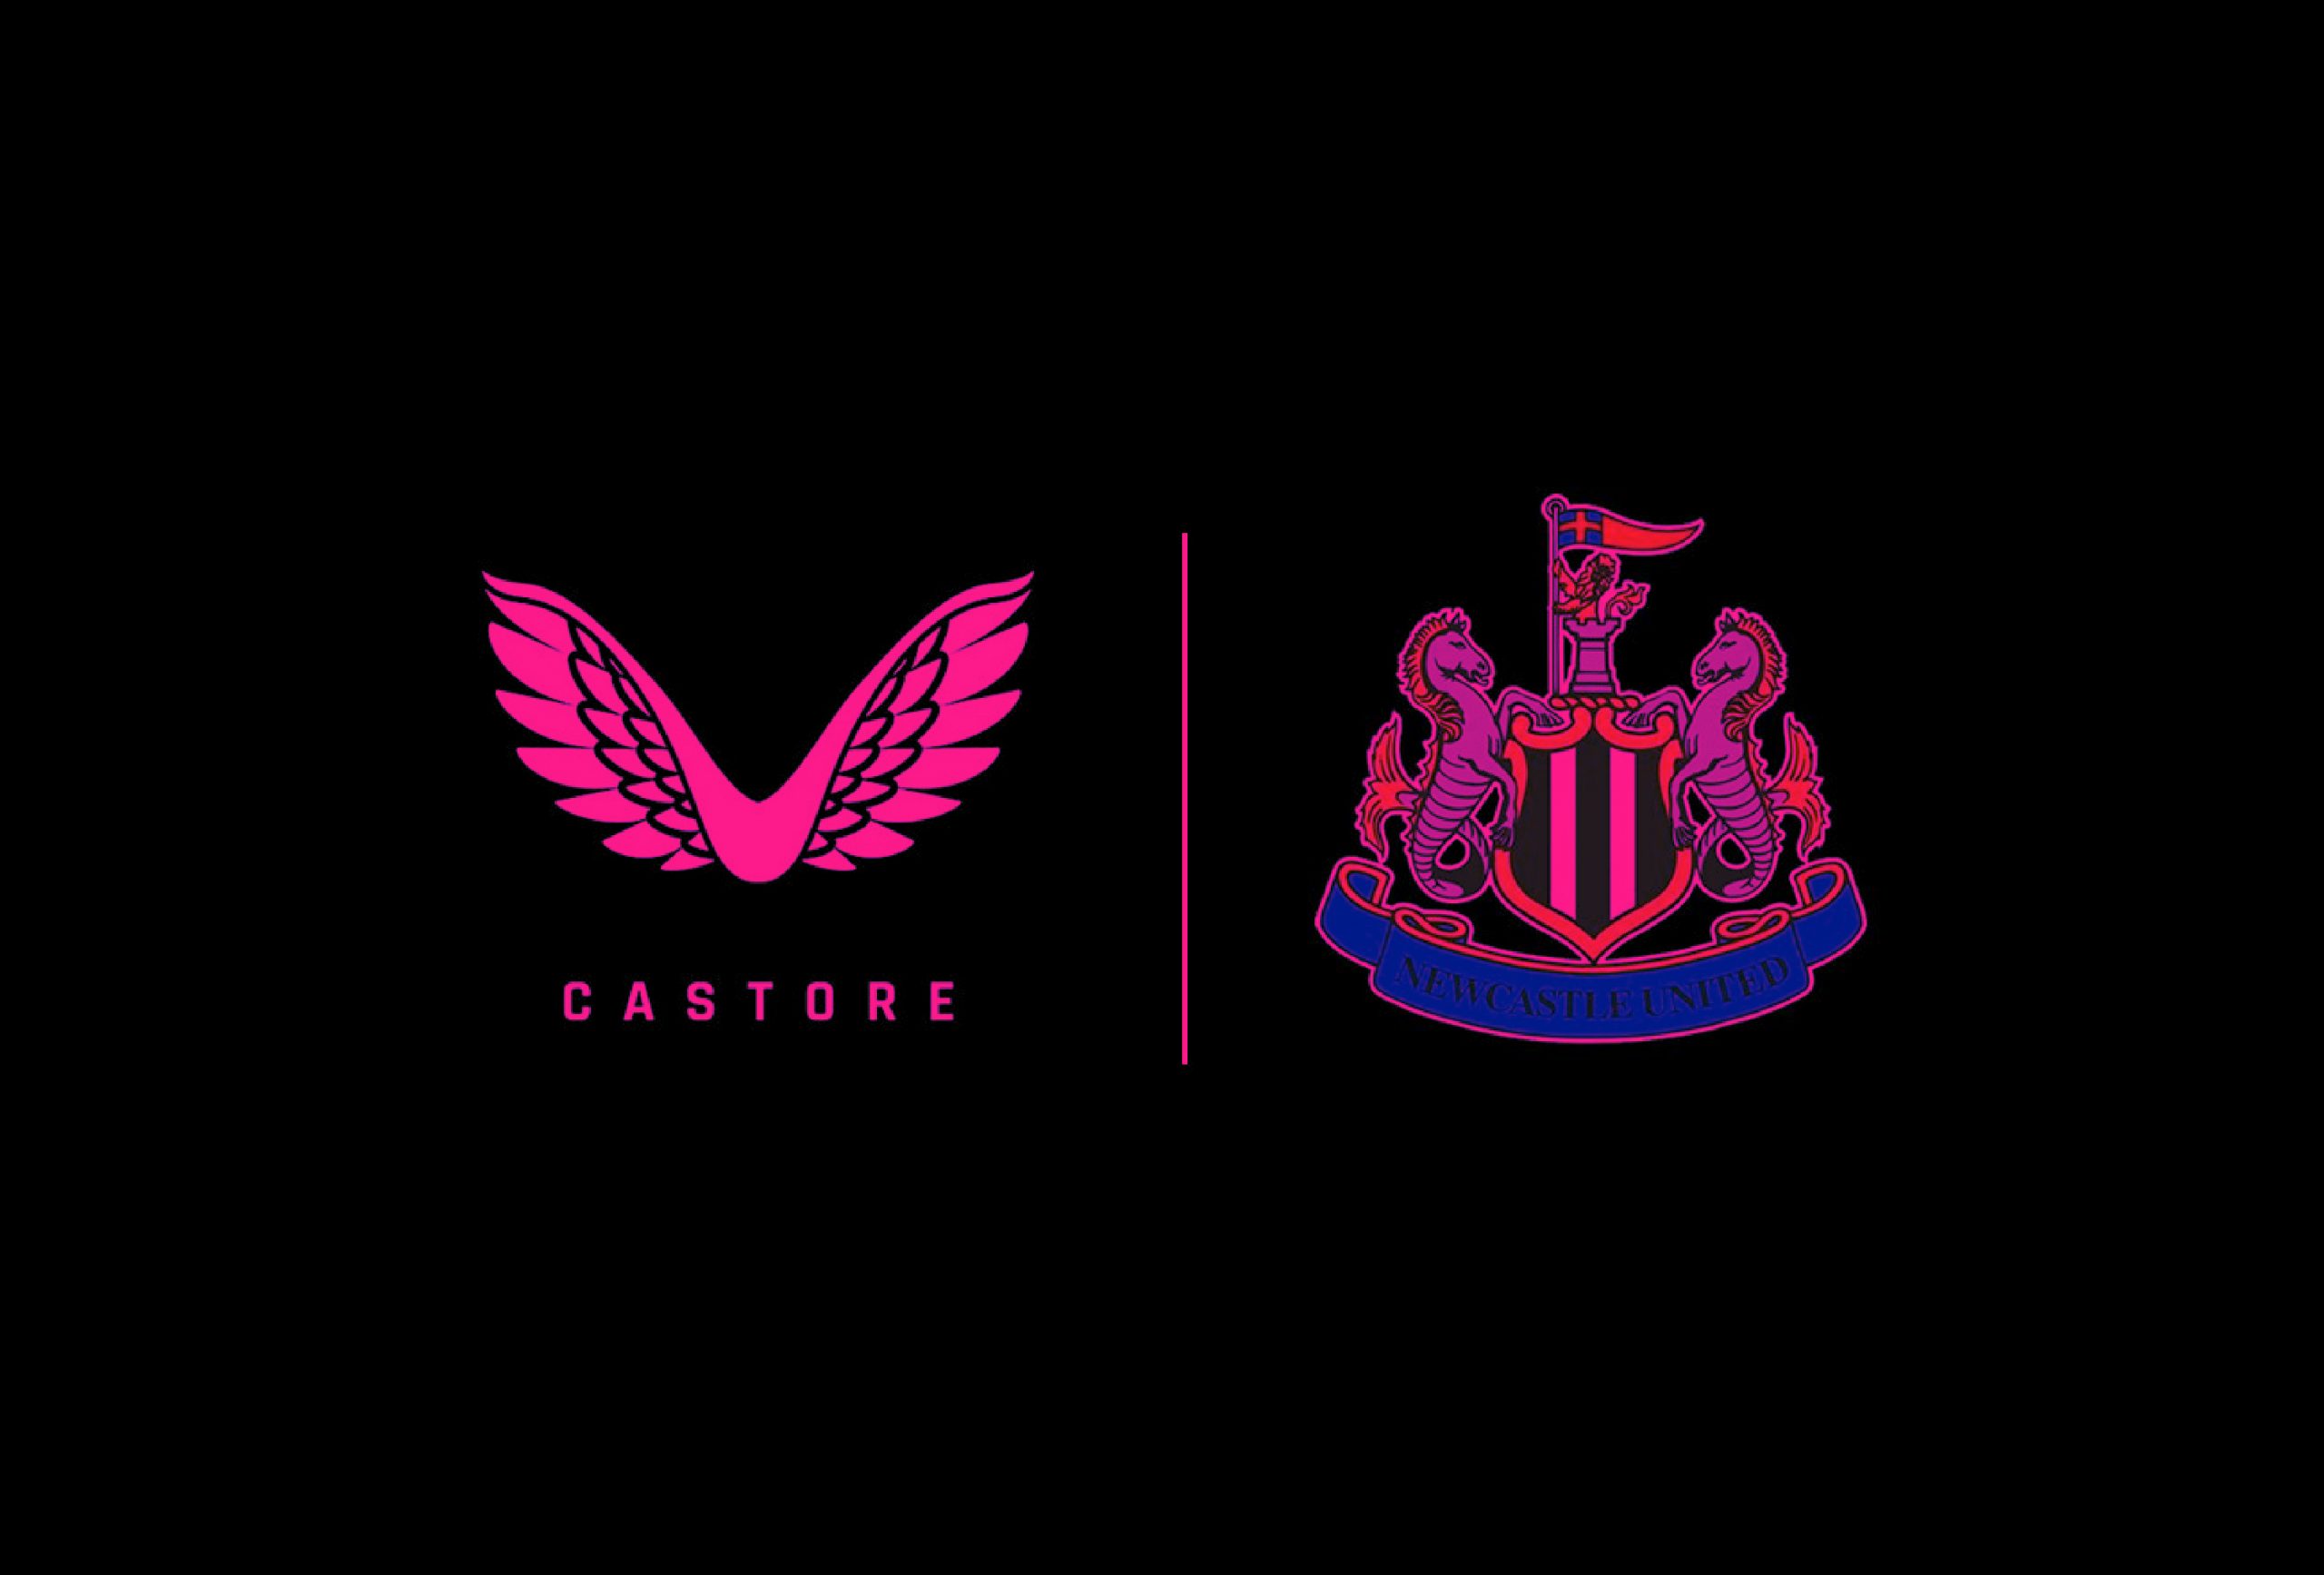 Gorgeous concept kits emerge as Newcastle United agree new deal with Castore